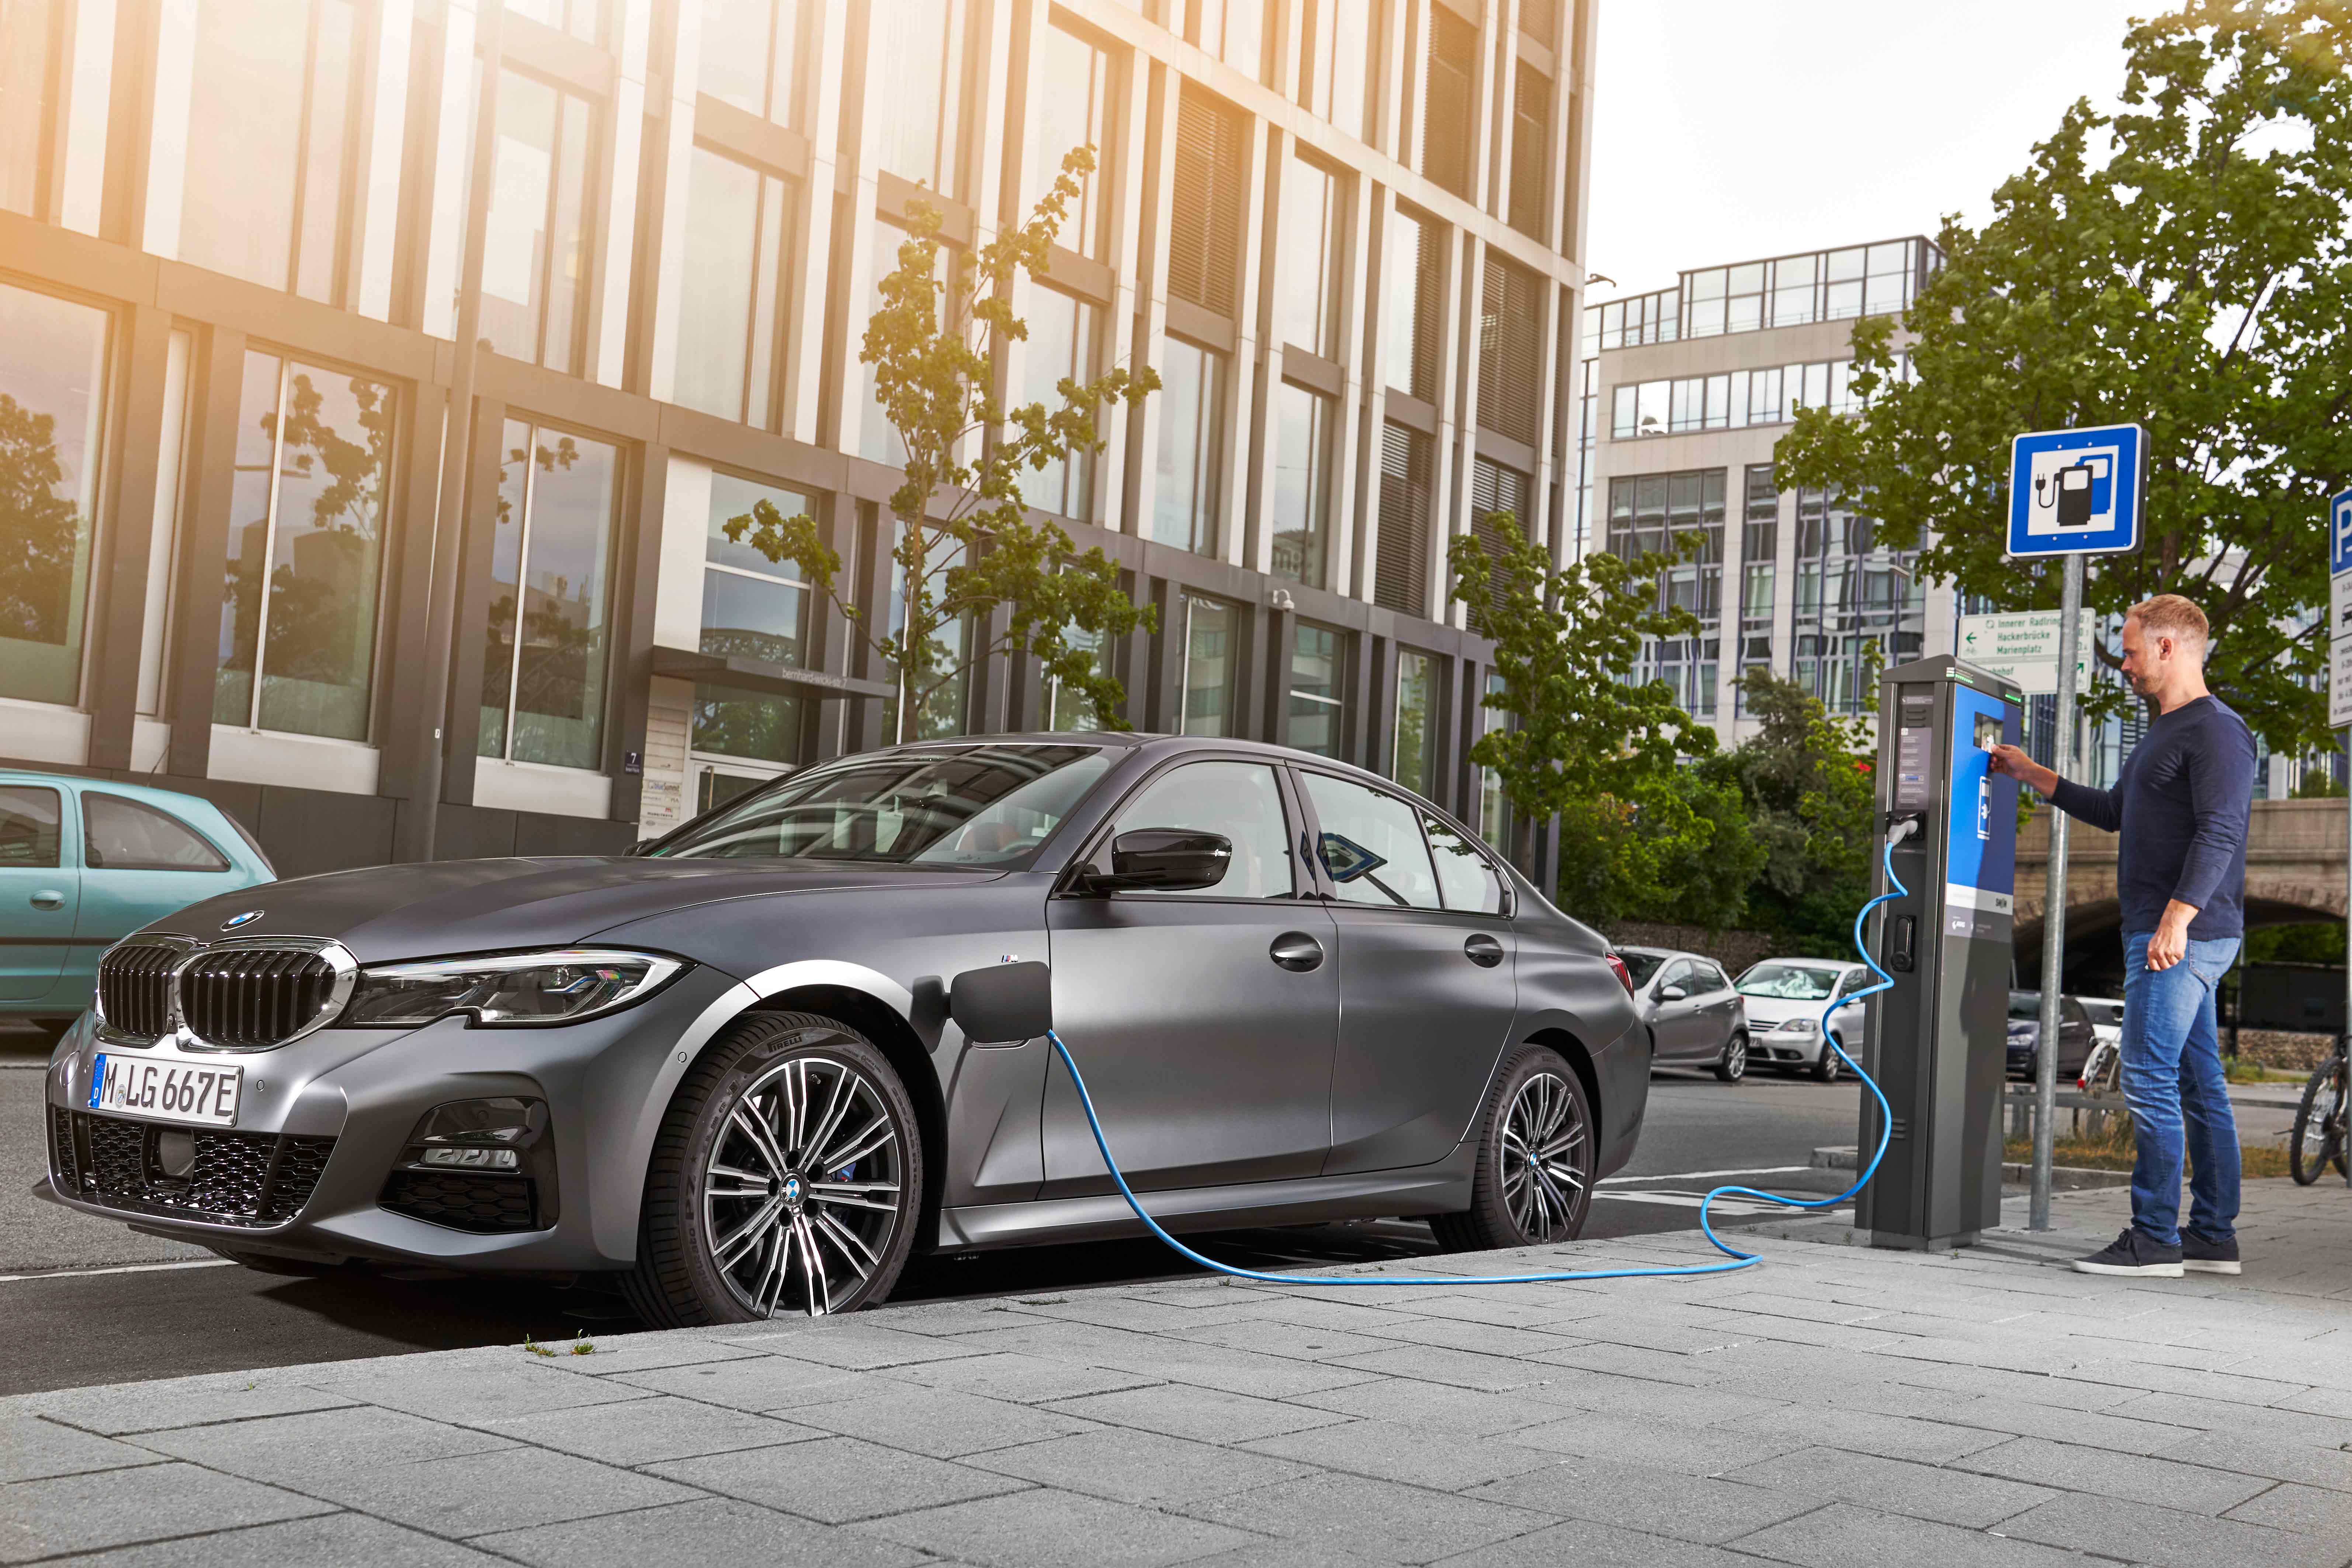 More than seven million vehicles with all-electric or plug-in hybrid drive systems by the year 2030